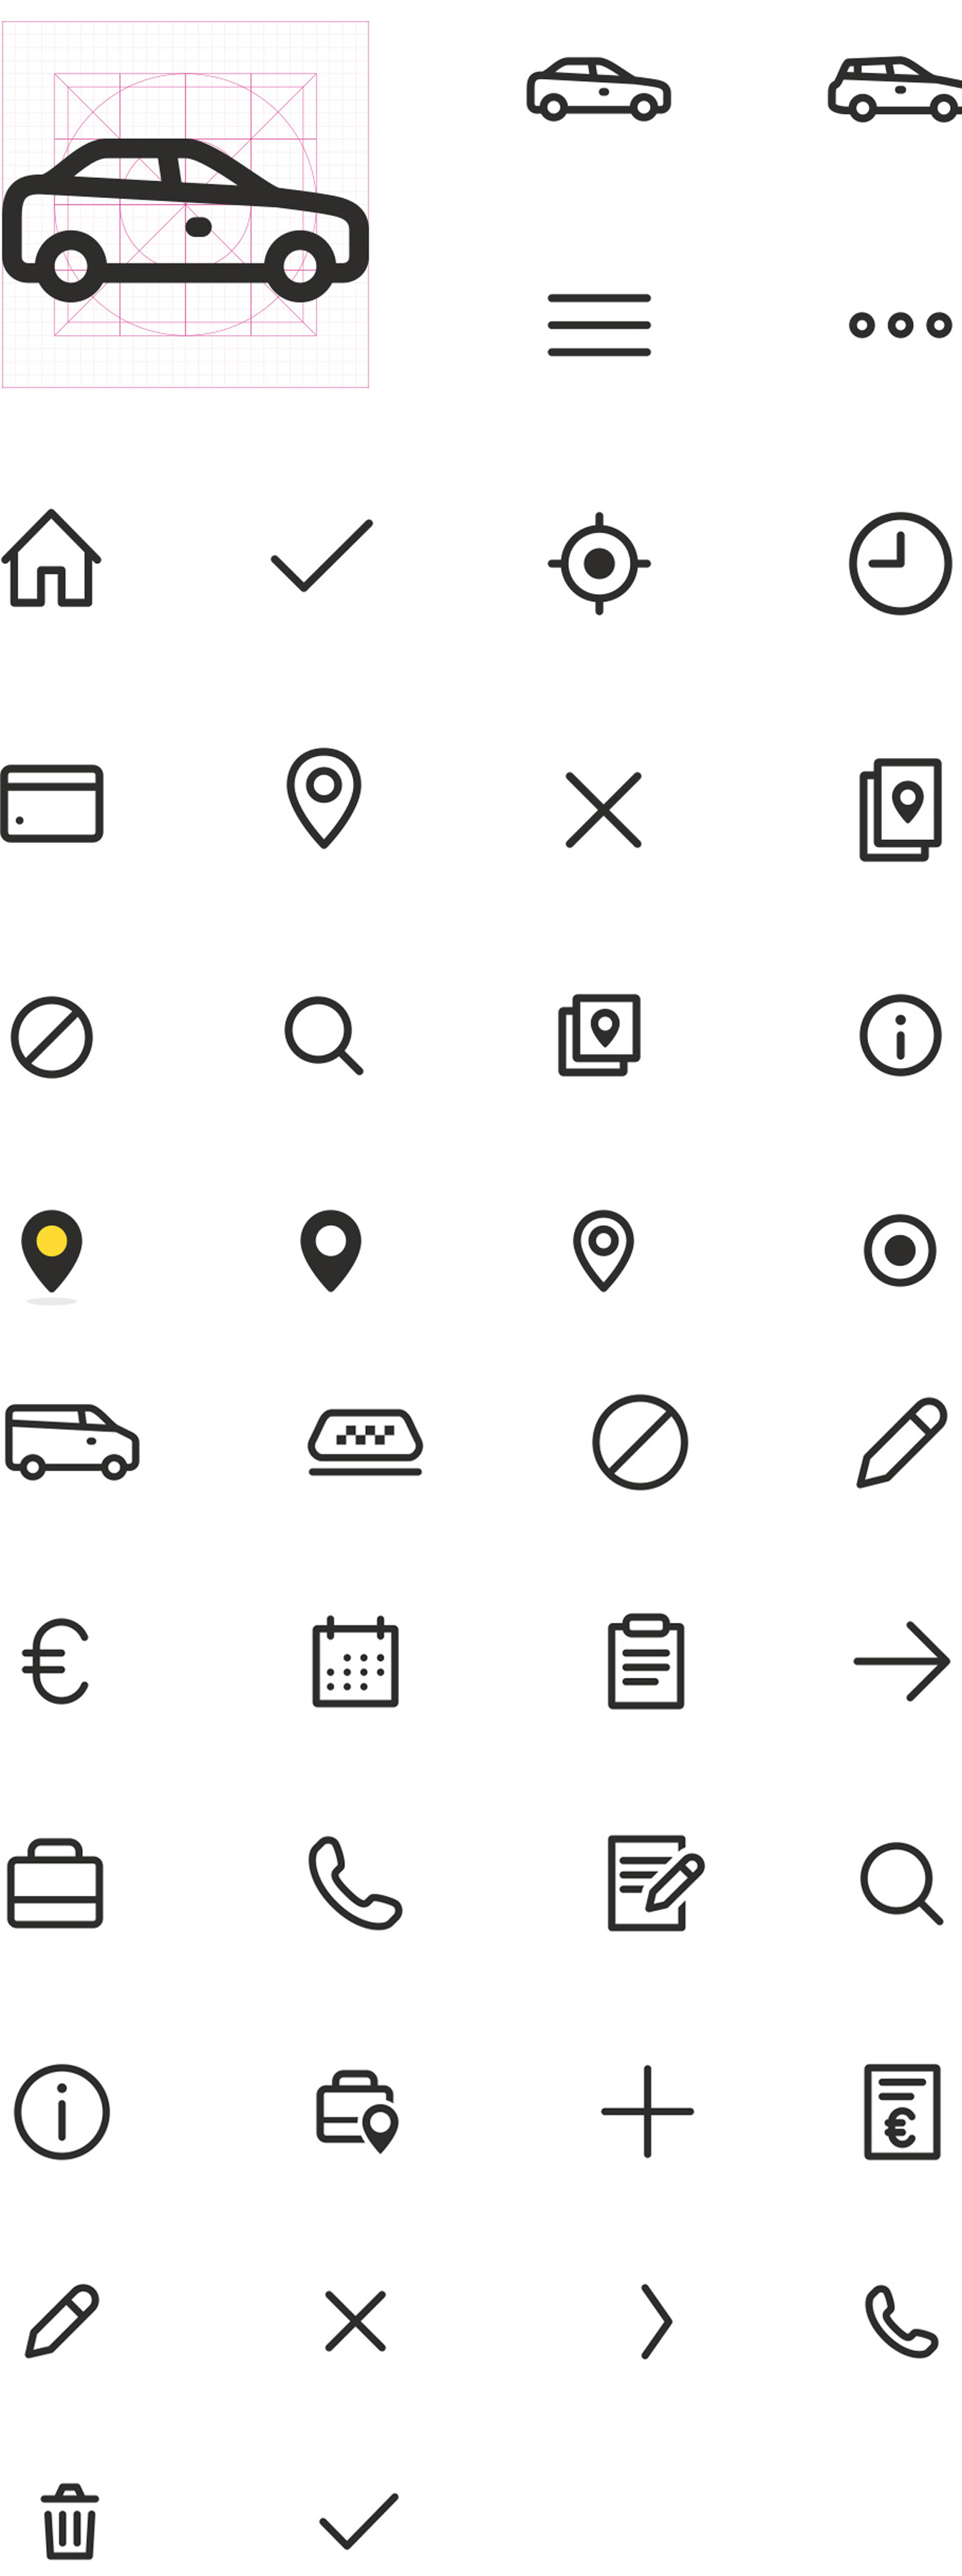 We created a fully customized icon set for Taksini which was converted into a font for easy implementation.